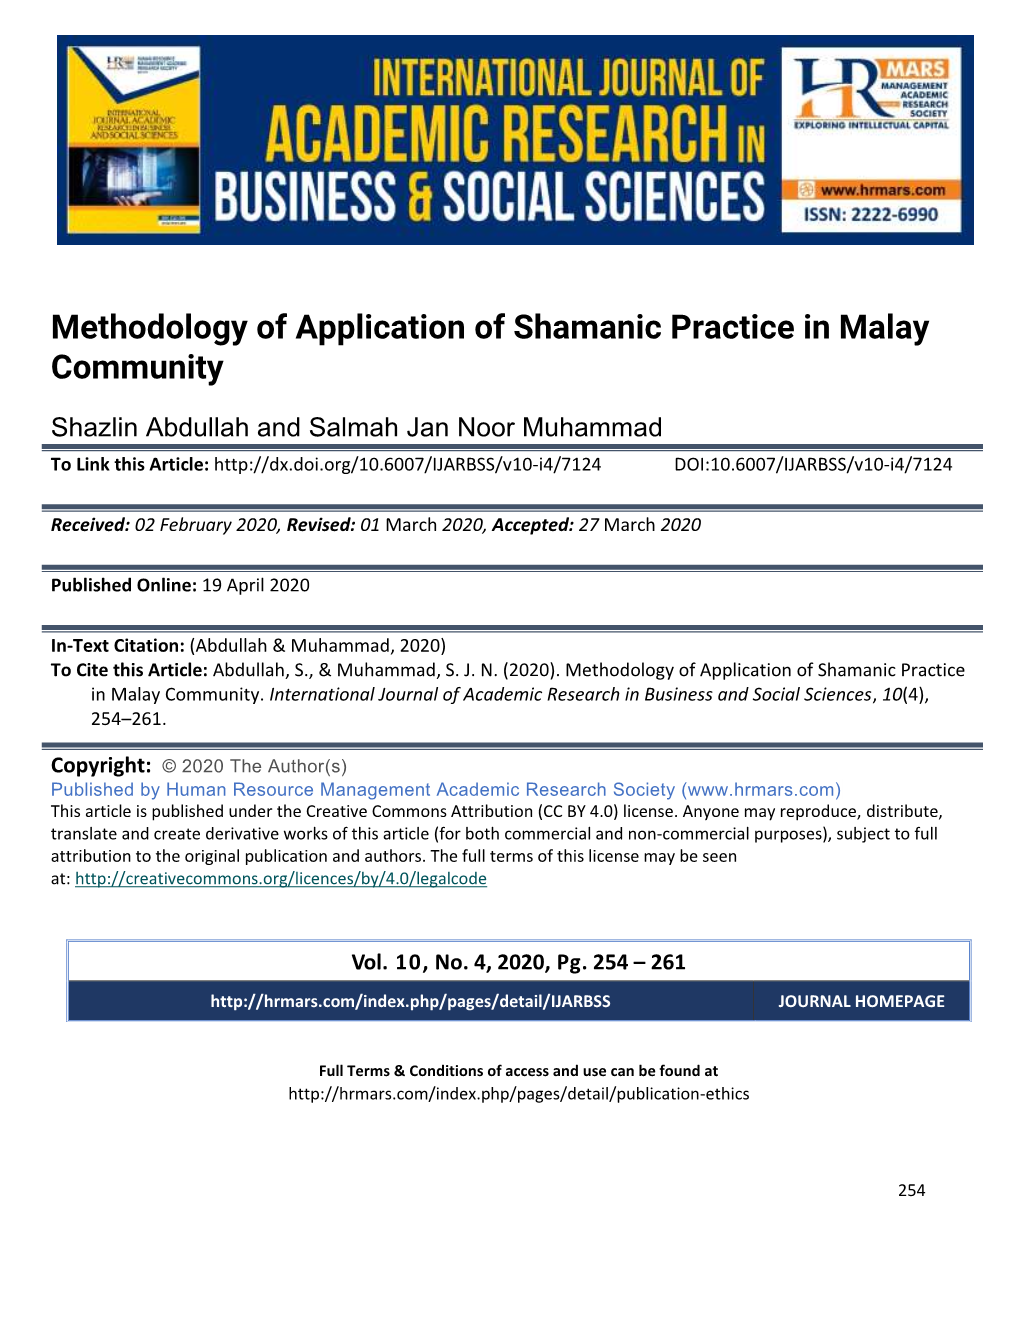 Methodology of Application of Shamanic Practice in Malay Community